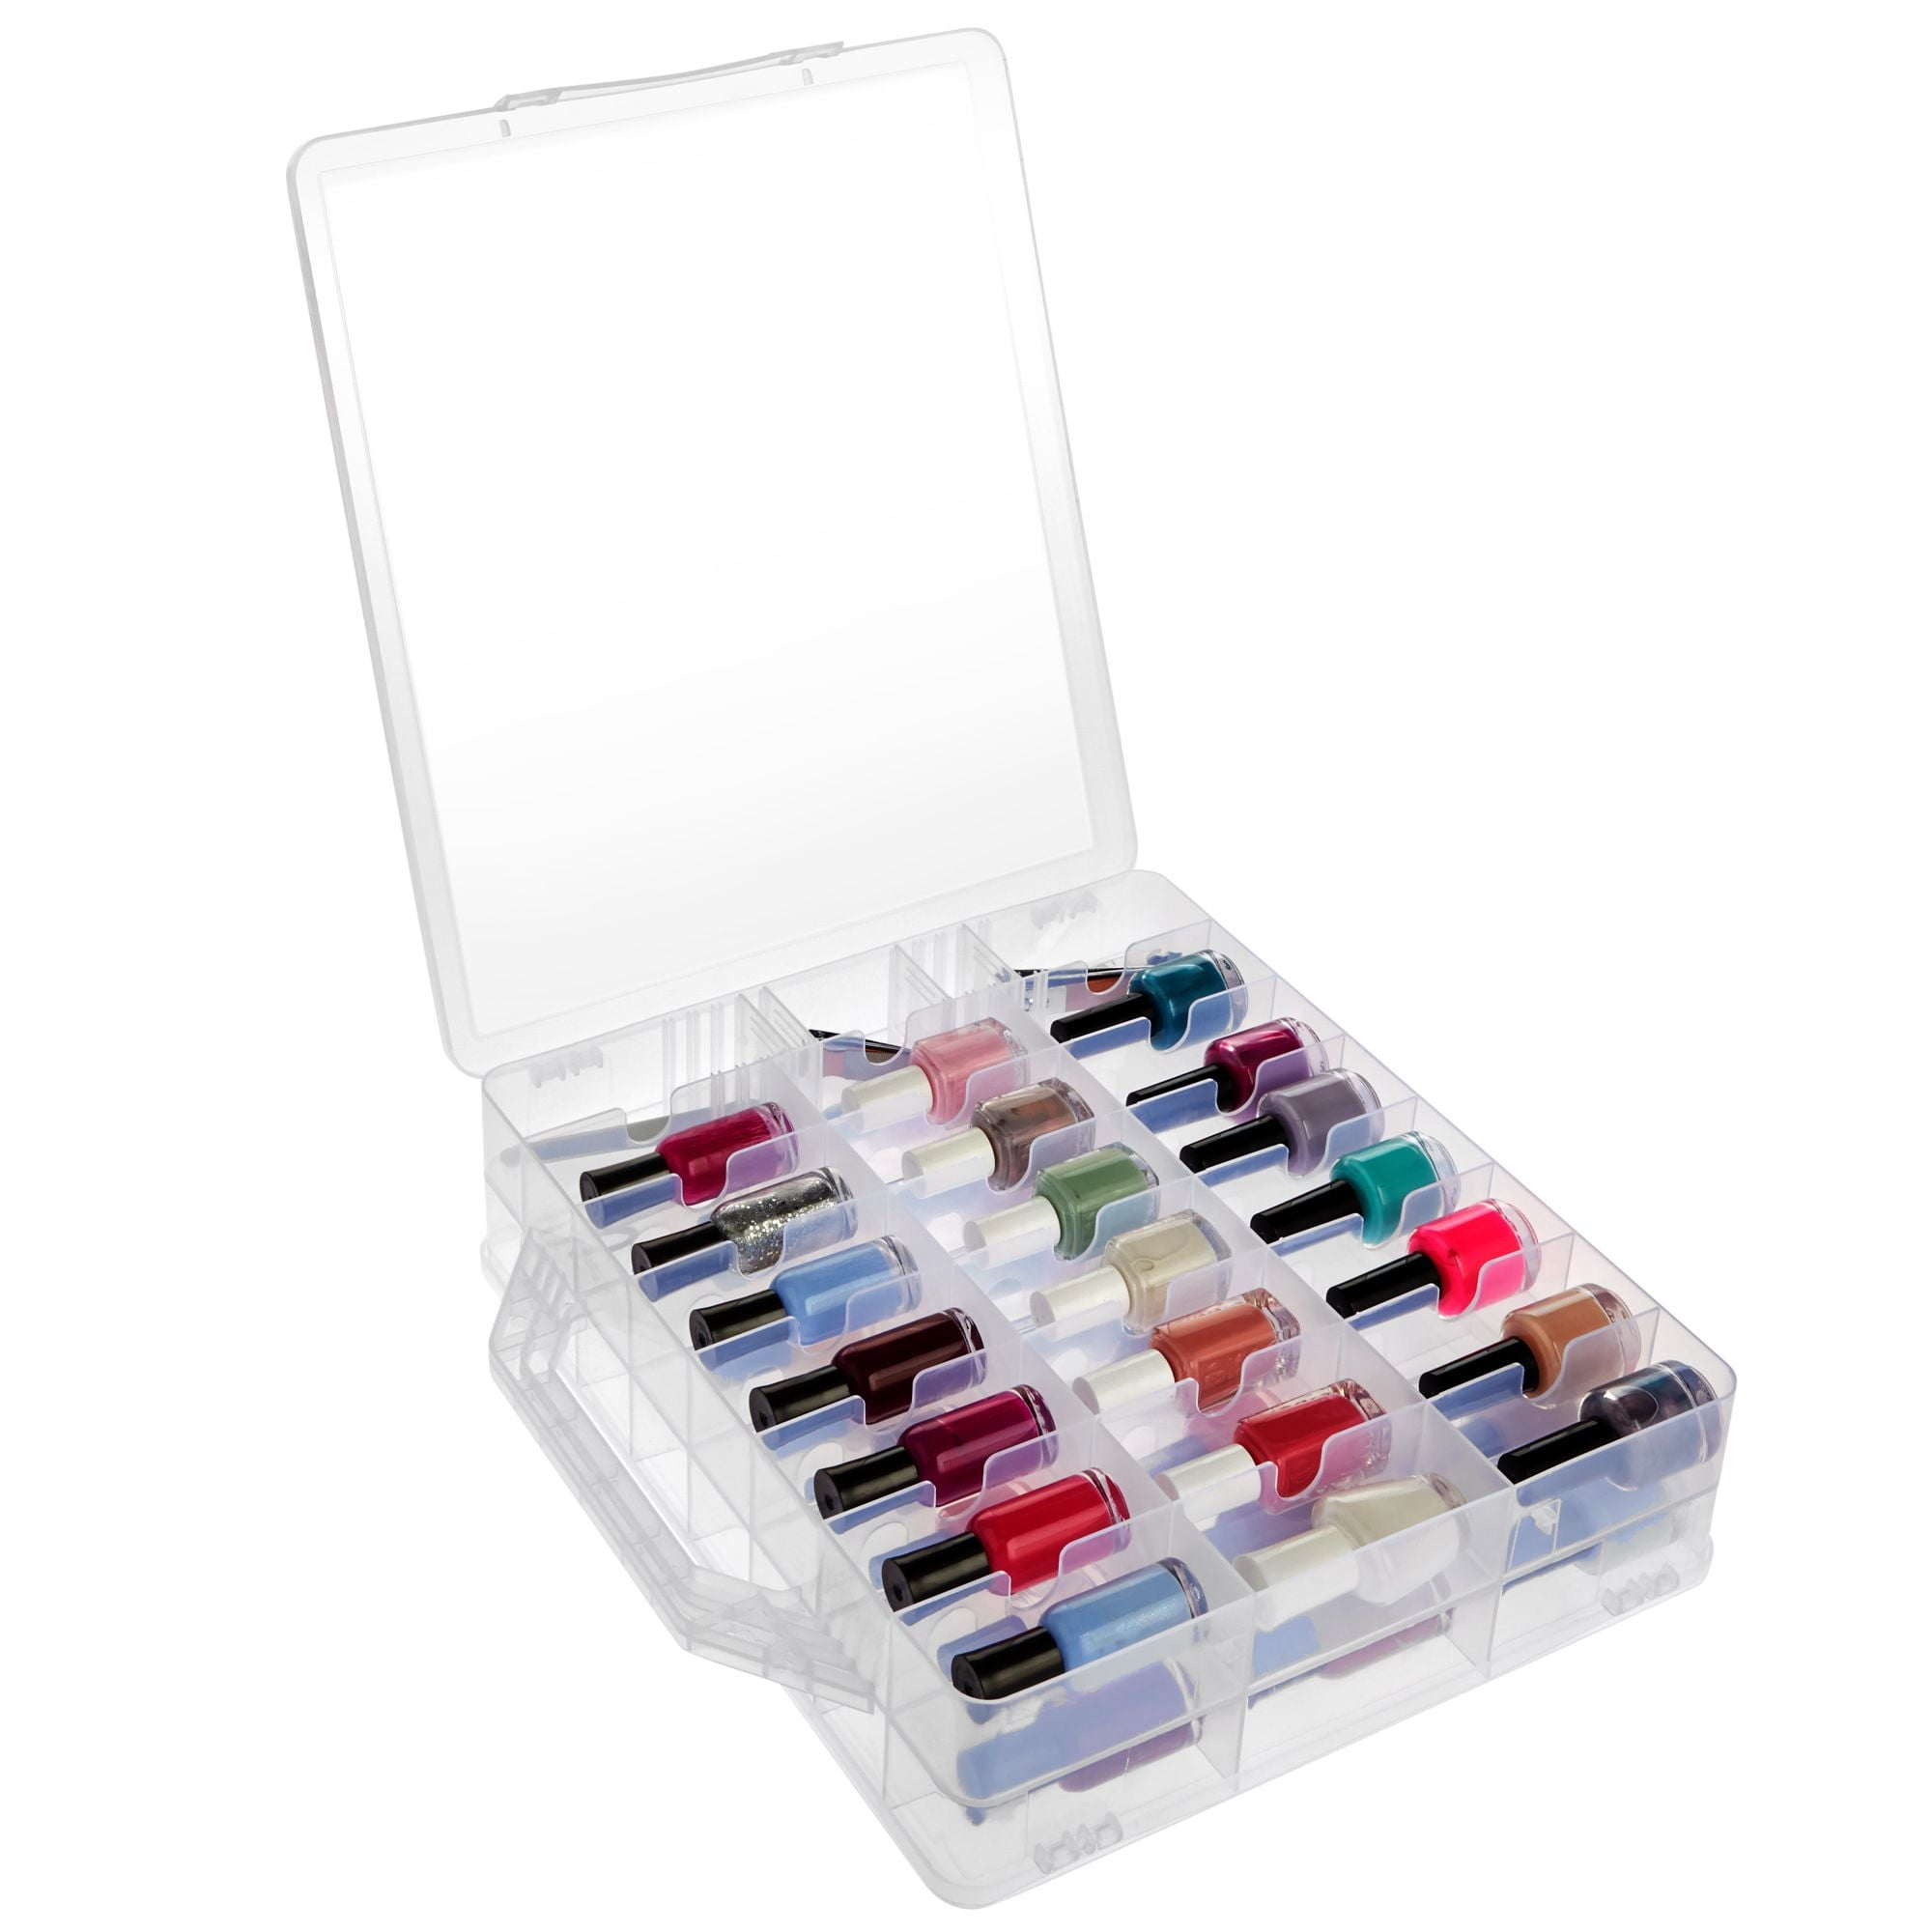  Covkev Curved Nail Polish Organizer Hold 50 Bottles (Black :  Beauty & Personal Care